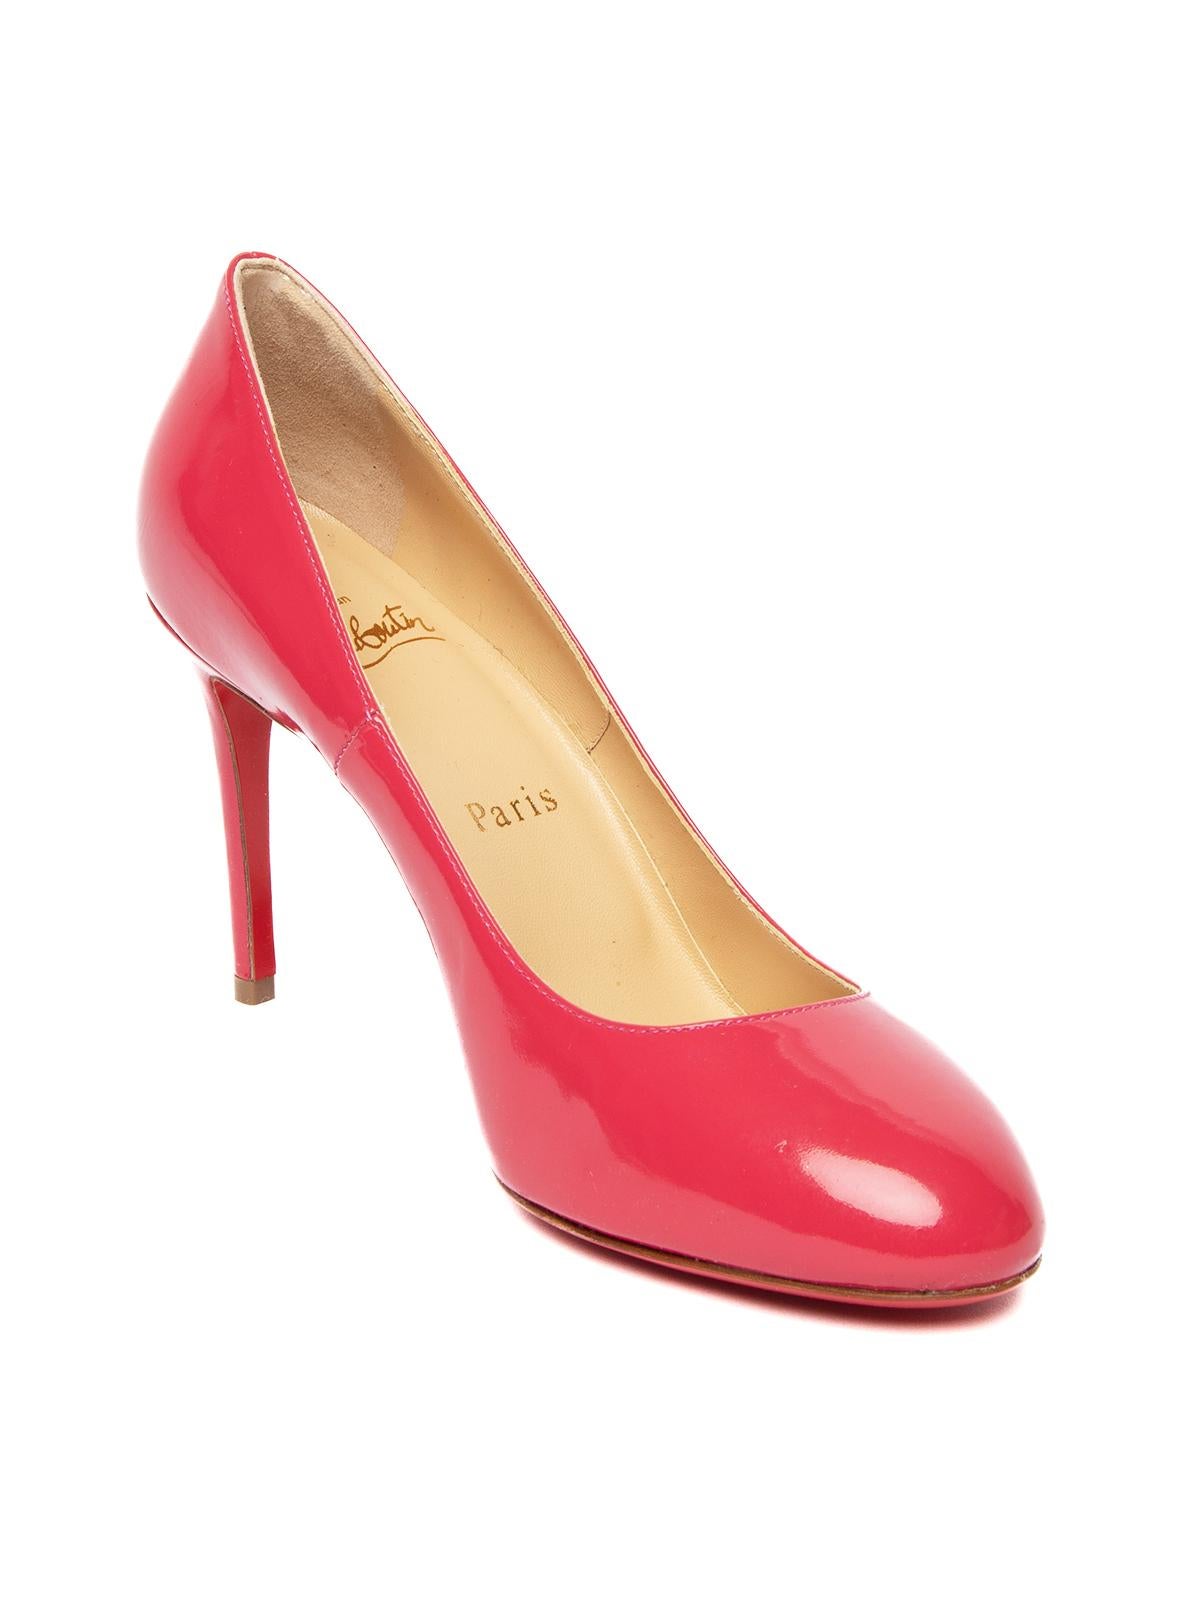 Editors Note Buy into the legendary Christian Louboutin brand with this pair of used Louboutin shoes. Show off the famous Christian Louboutin used red bottoms by making this pair of high end consignment used Christian Louboutin pink Eloise designer